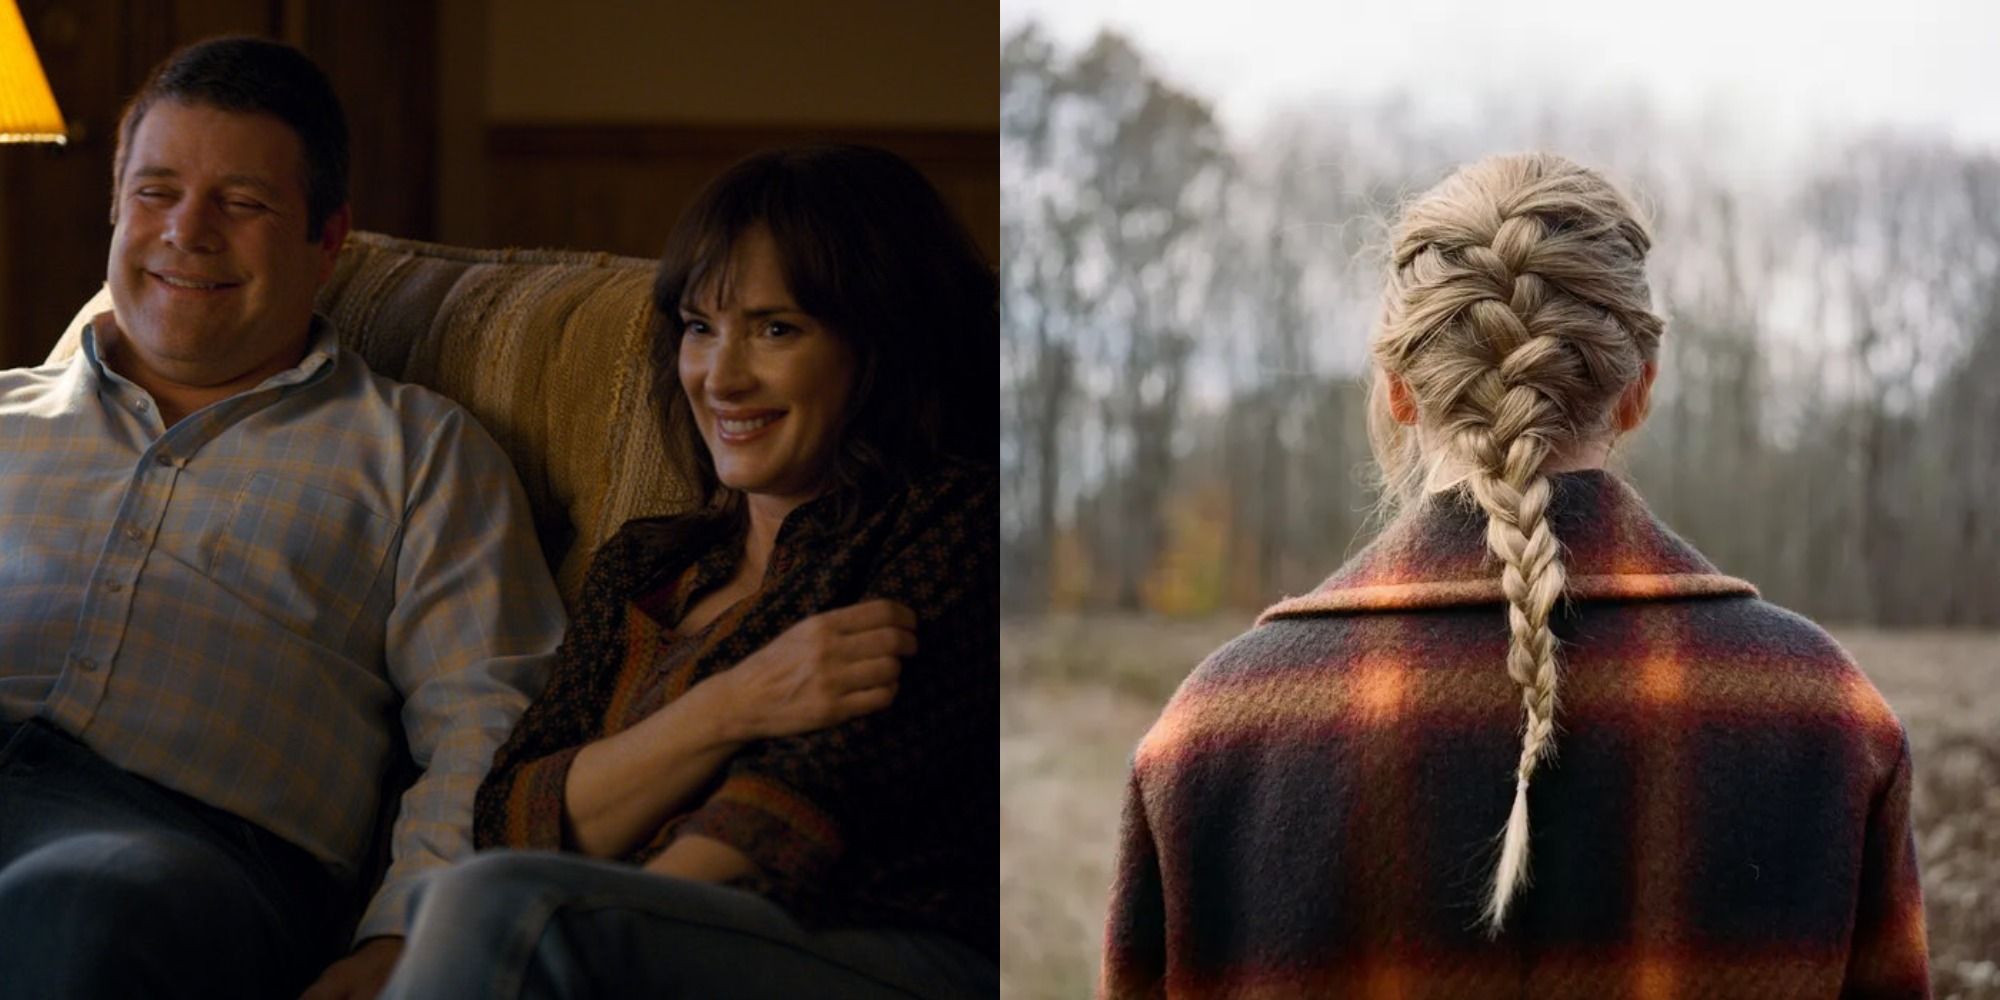 Split image showing Bob and Joyce in Stranger Things and the cover to the album Cardigan.